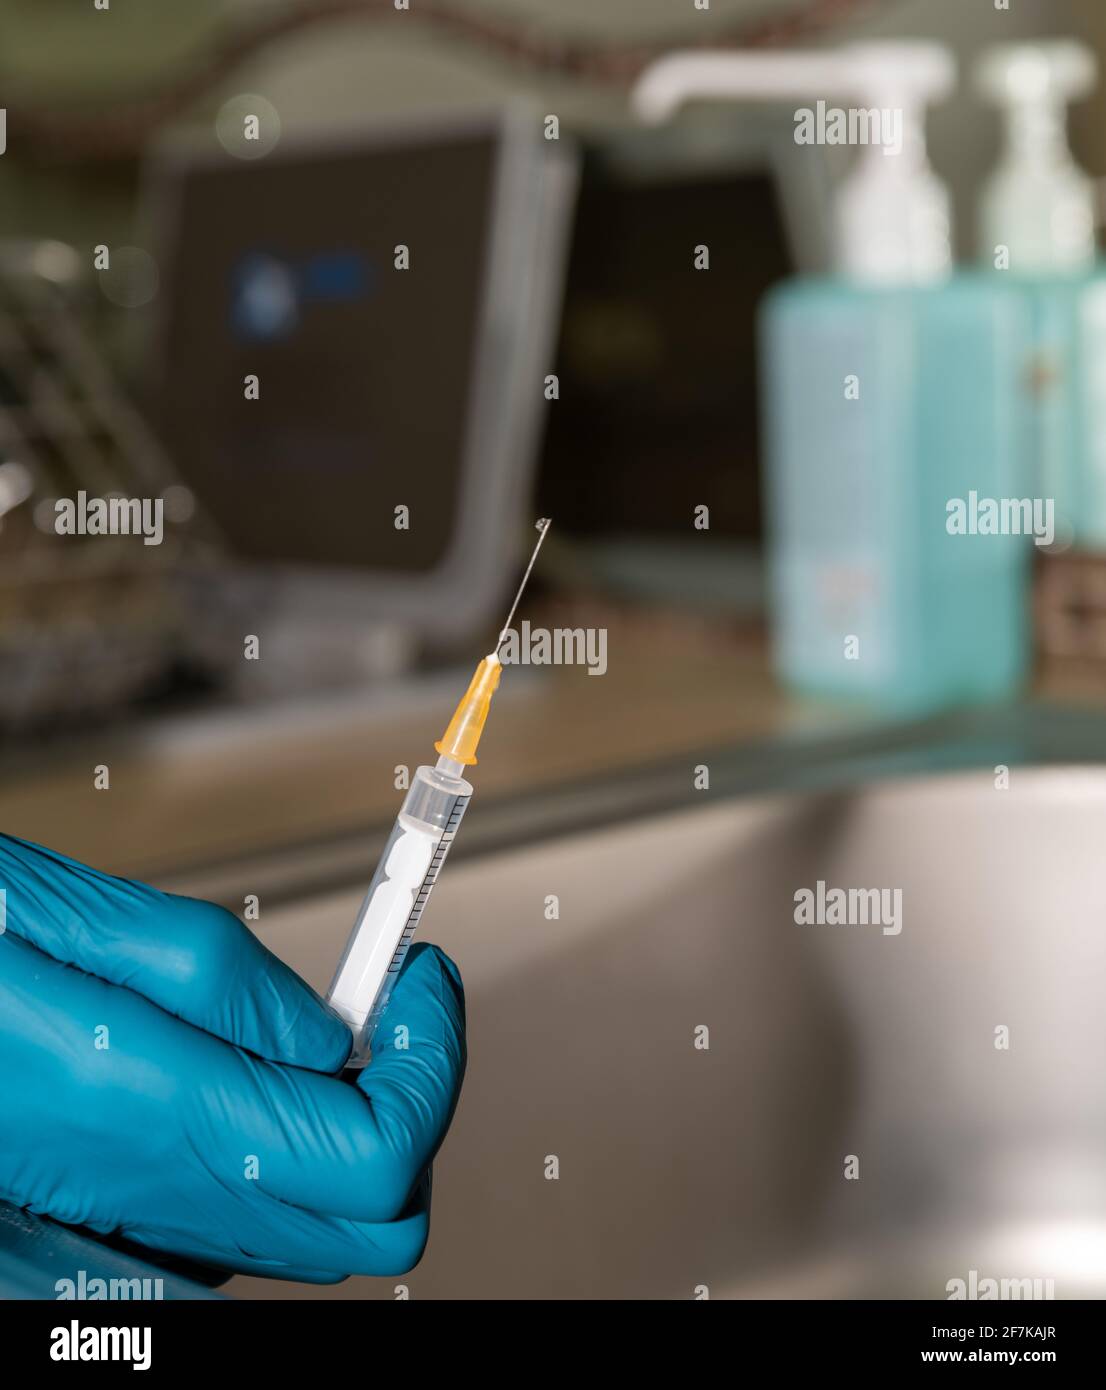 Preparation of the syringe for vaccination, doctor's hand in rubber gloves, close up. Disinfectant in the background. Stock Photo